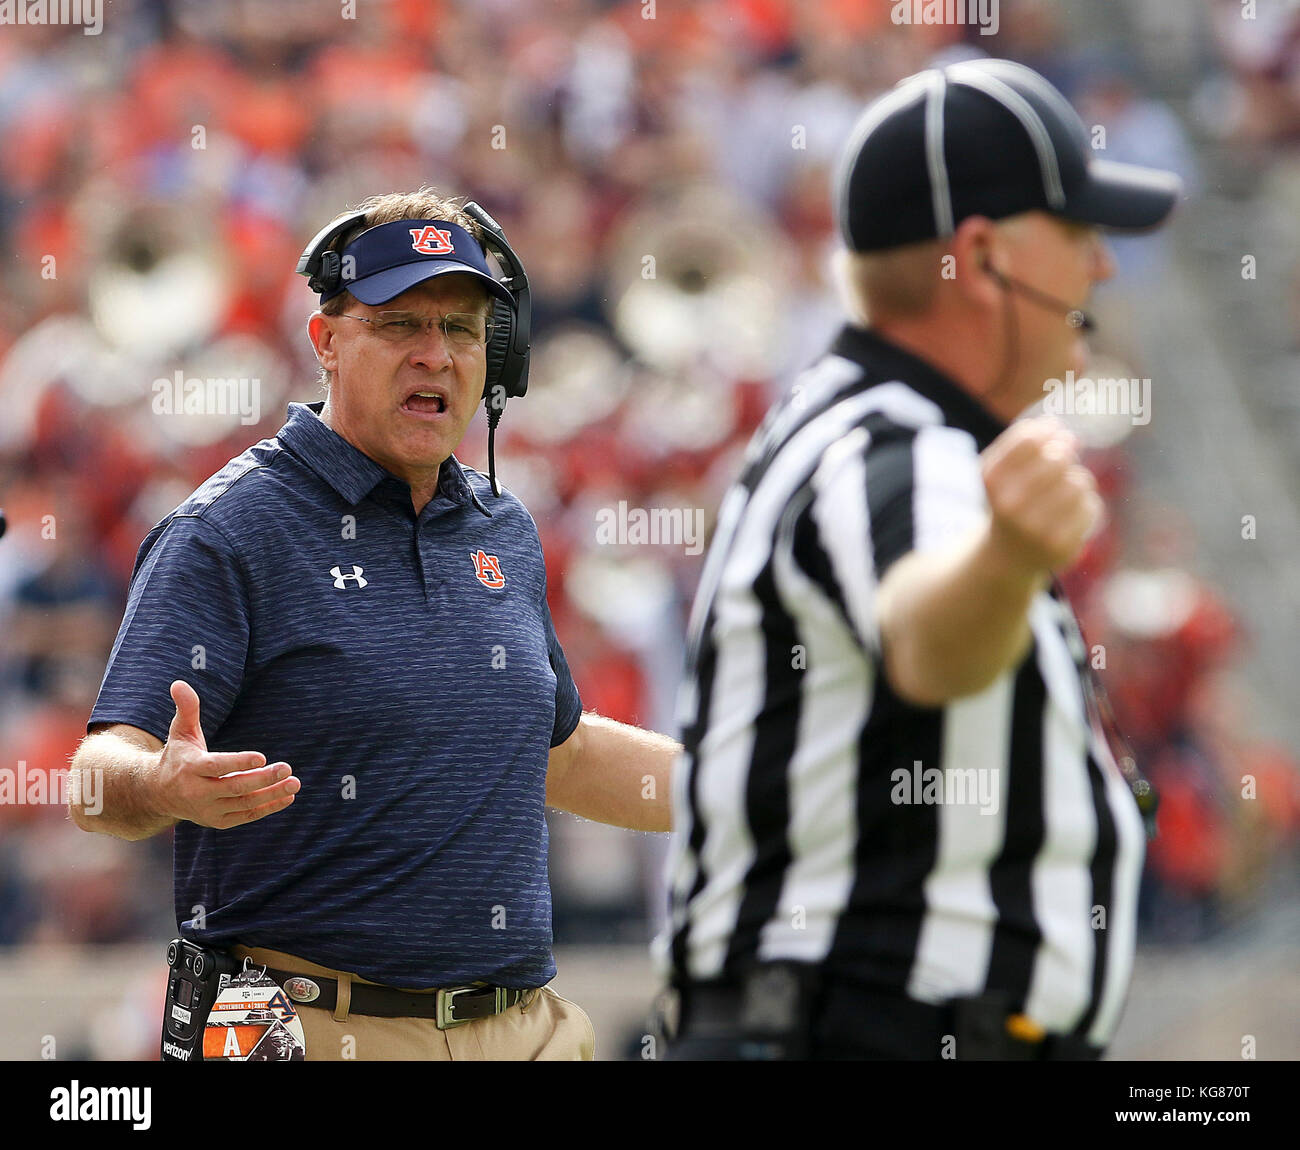 November 4, 2017: Auburn Tigers head coach Gus Malzahn questions a call in the first quarter during the NCAA football game between the Auburn Tigers and the Texas A&M Aggies at Kyle Field in College Station, TX; John Glaser/CSM. Stock Photo